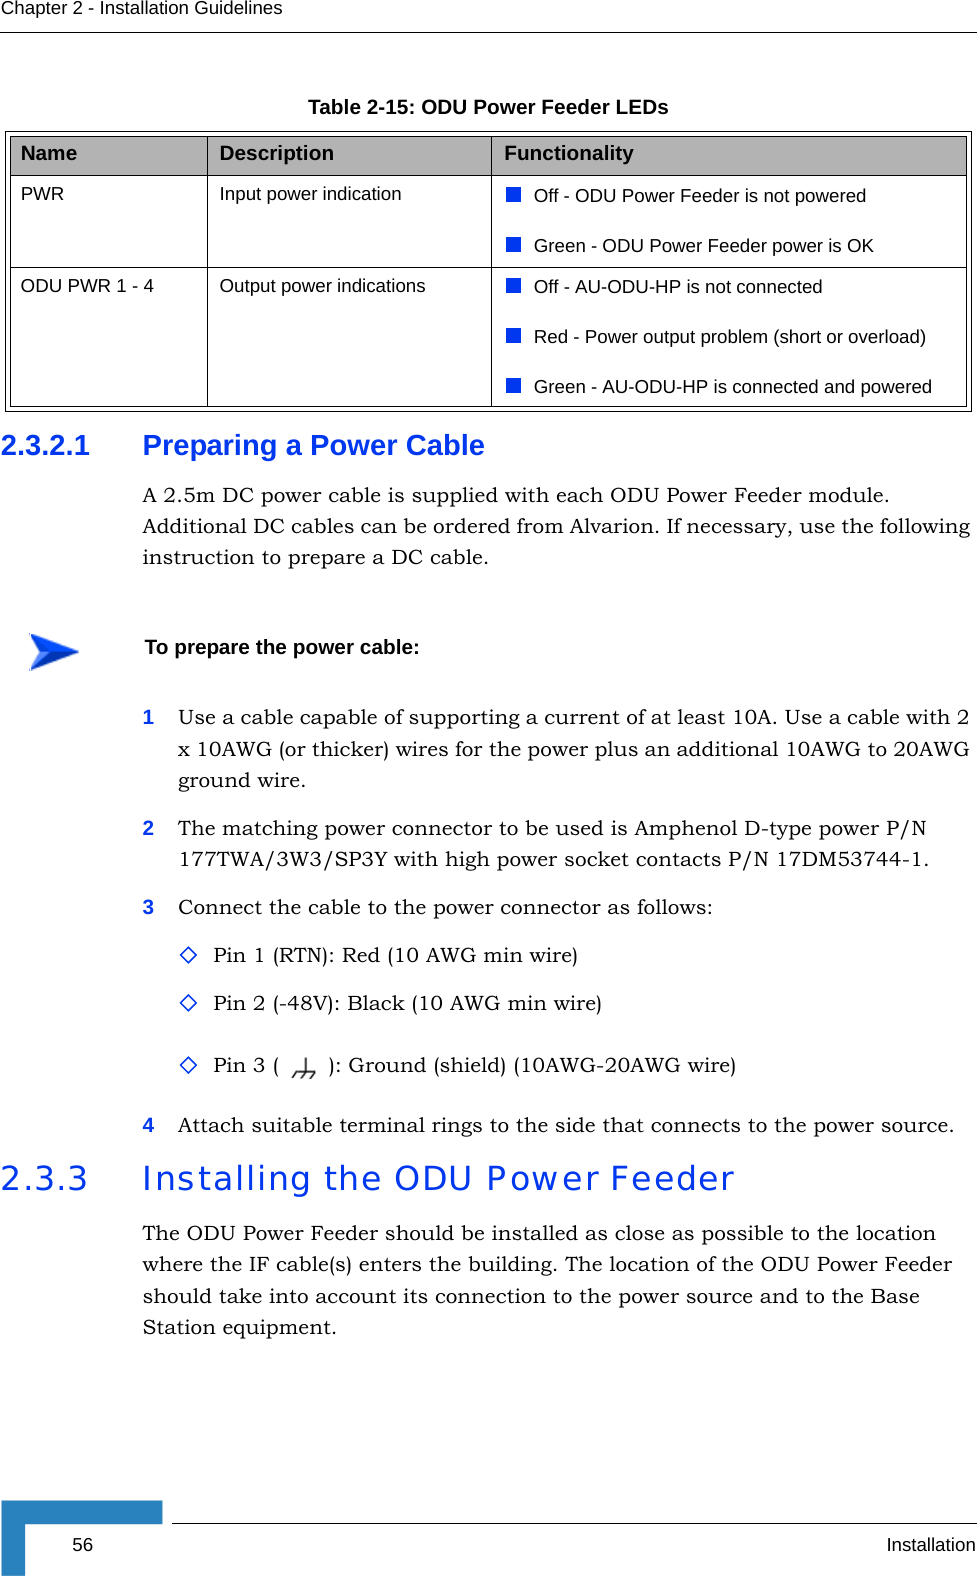 56 InstallationChapter 2 - Installation Guidelines2.3.2.1 Preparing a Power CableA 2.5m DC power cable is supplied with each ODU Power Feeder module. Additional DC cables can be ordered from Alvarion. If necessary, use the following instruction to prepare a DC cable.1Use a cable capable of supporting a current of at least 10A. Use a cable with 2 x 10AWG (or thicker) wires for the power plus an additional 10AWG to 20AWG ground wire.2The matching power connector to be used is Amphenol D-type power P/N 177TWA/3W3/SP3Y with high power socket contacts P/N 17DM53744-1.3Connect the cable to the power connector as follows:Pin 1 (RTN): Red (10 AWG min wire)Pin 2 (-48V): Black (10 AWG min wire)Pin 3 ( ): Ground (shield) (10AWG-20AWG wire)4Attach suitable terminal rings to the side that connects to the power source.2.3.3 Installing the ODU Power FeederThe ODU Power Feeder should be installed as close as possible to the location where the IF cable(s) enters the building. The location of the ODU Power Feeder should take into account its connection to the power source and to the Base Station equipment.Table 2-15: ODU Power Feeder LEDsName  Description FunctionalityPWR Input power indication Off - ODU Power Feeder is not poweredGreen - ODU Power Feeder power is OKODU PWR 1 - 4  Output power indications Off - AU-ODU-HP is not connectedRed - Power output problem (short or overload)Green - AU-ODU-HP is connected and poweredTo prepare the power cable: